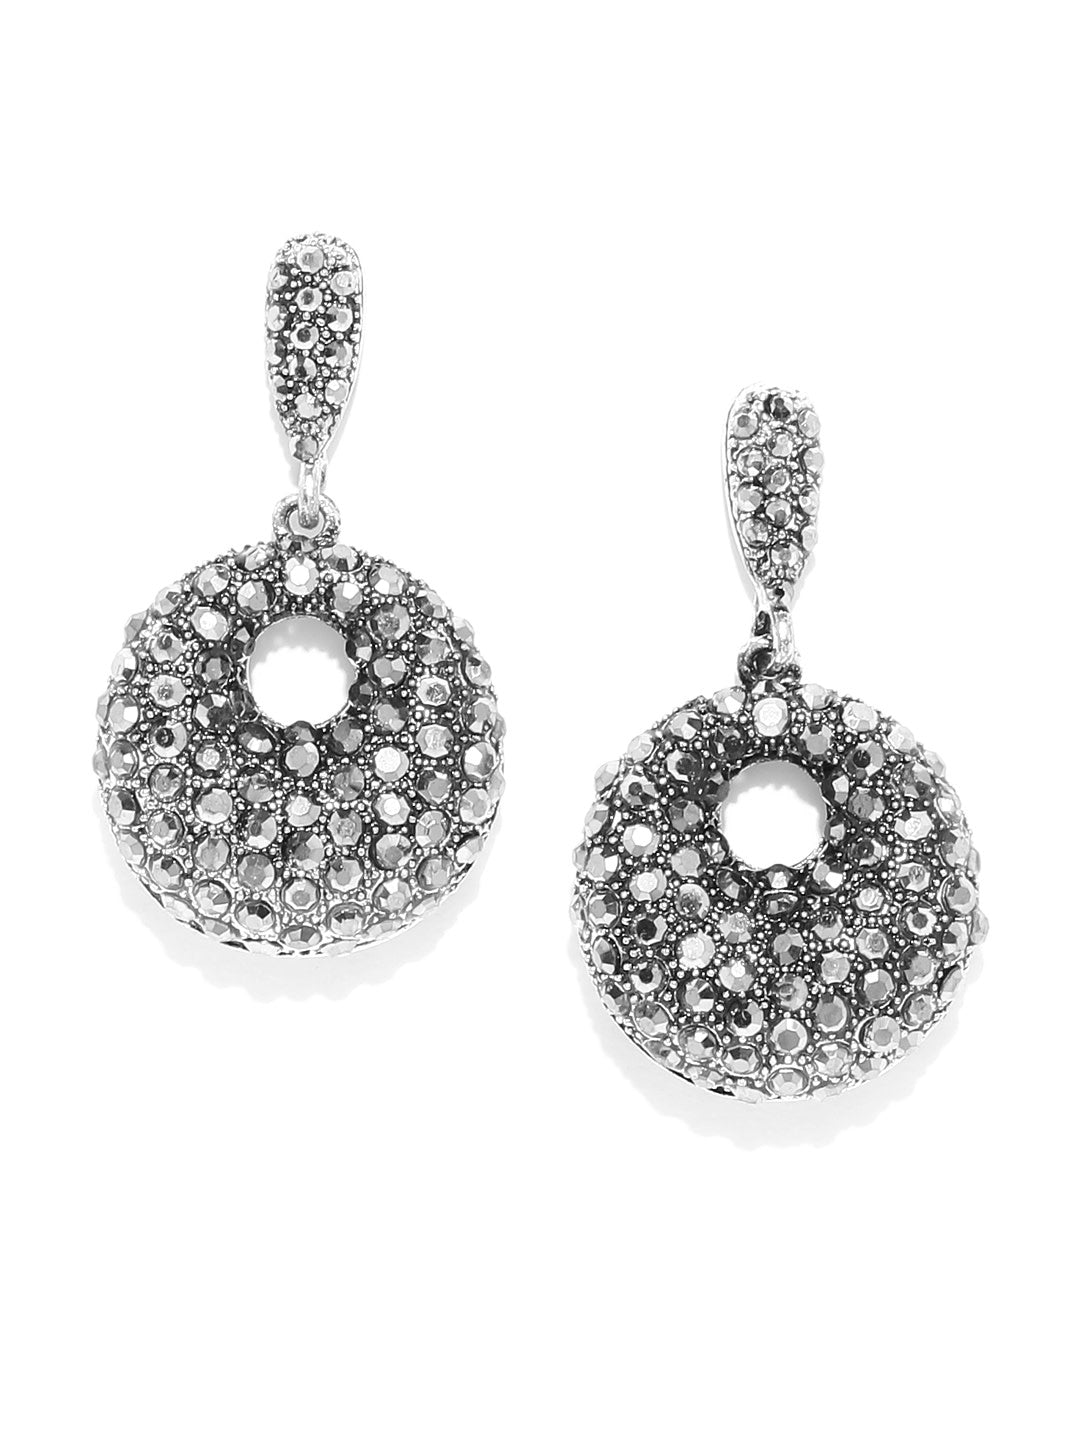 Designer Antique Silver Toned Stone Studded Trendy Stylish Fashionable Party Wear 3D Round Shape Drop Earrings For Women And Girls